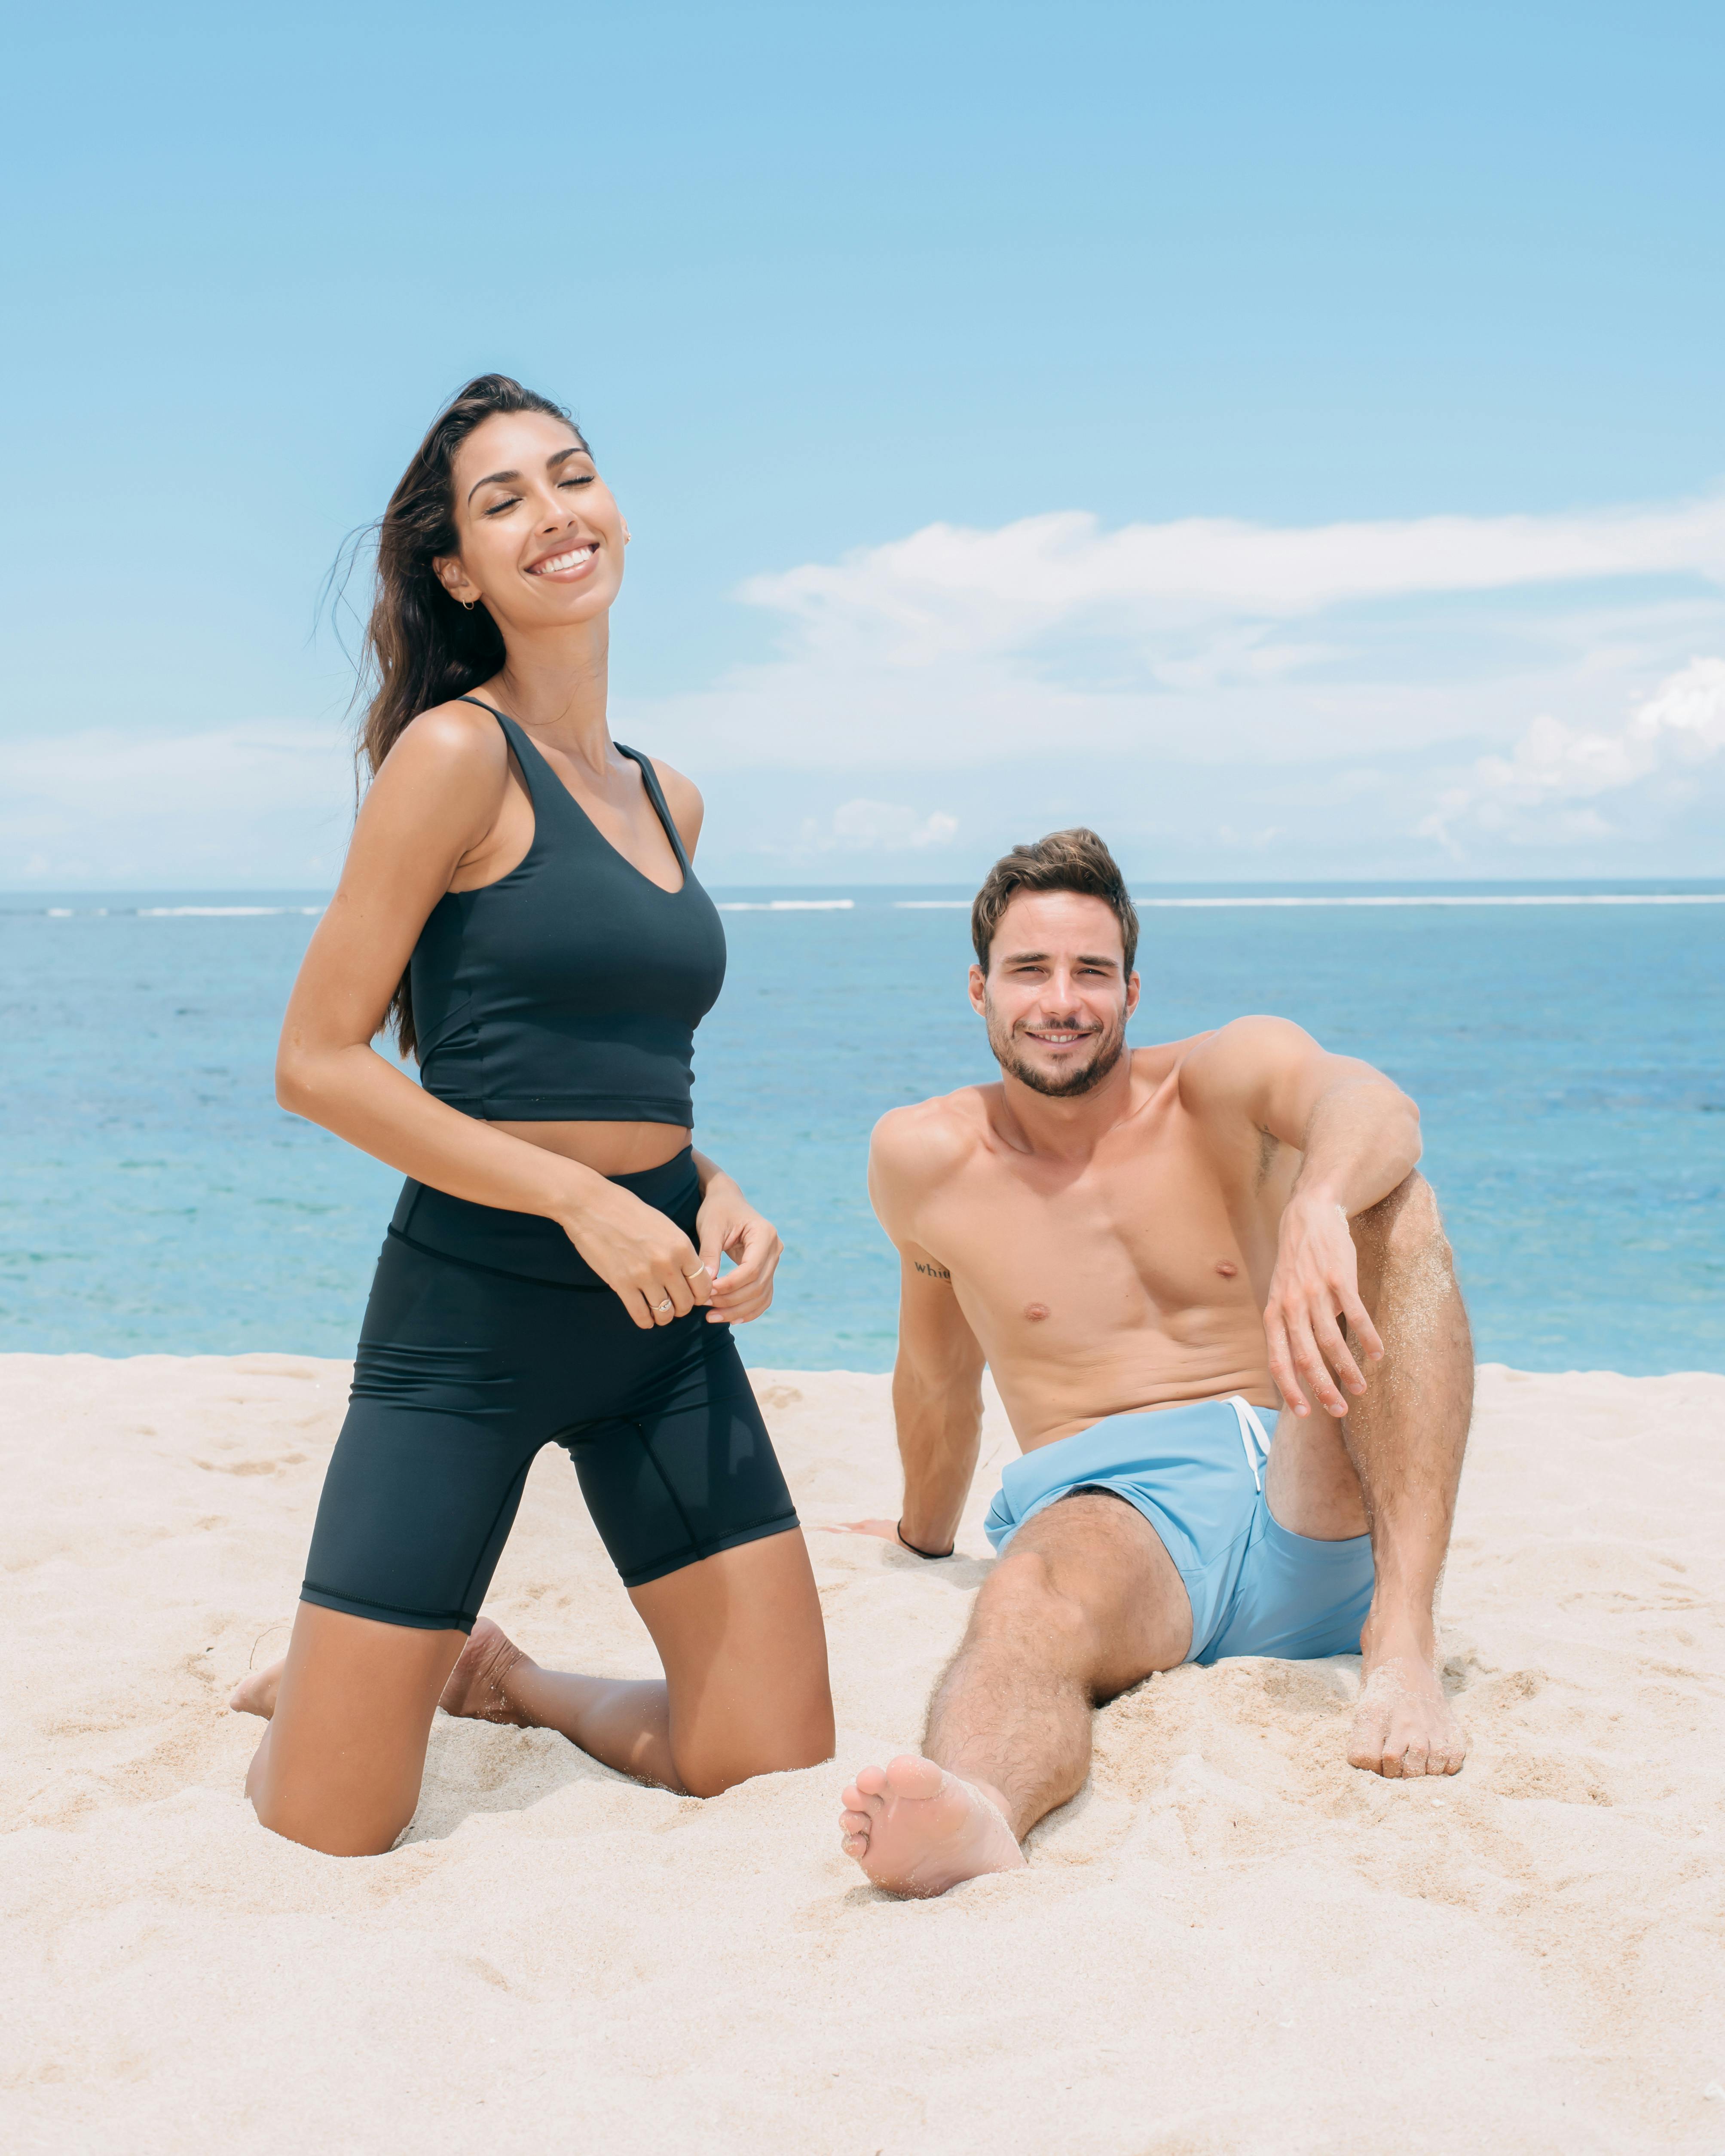 Free stock photo of ab workout, at the beach, athleisure clothing Stock Photo